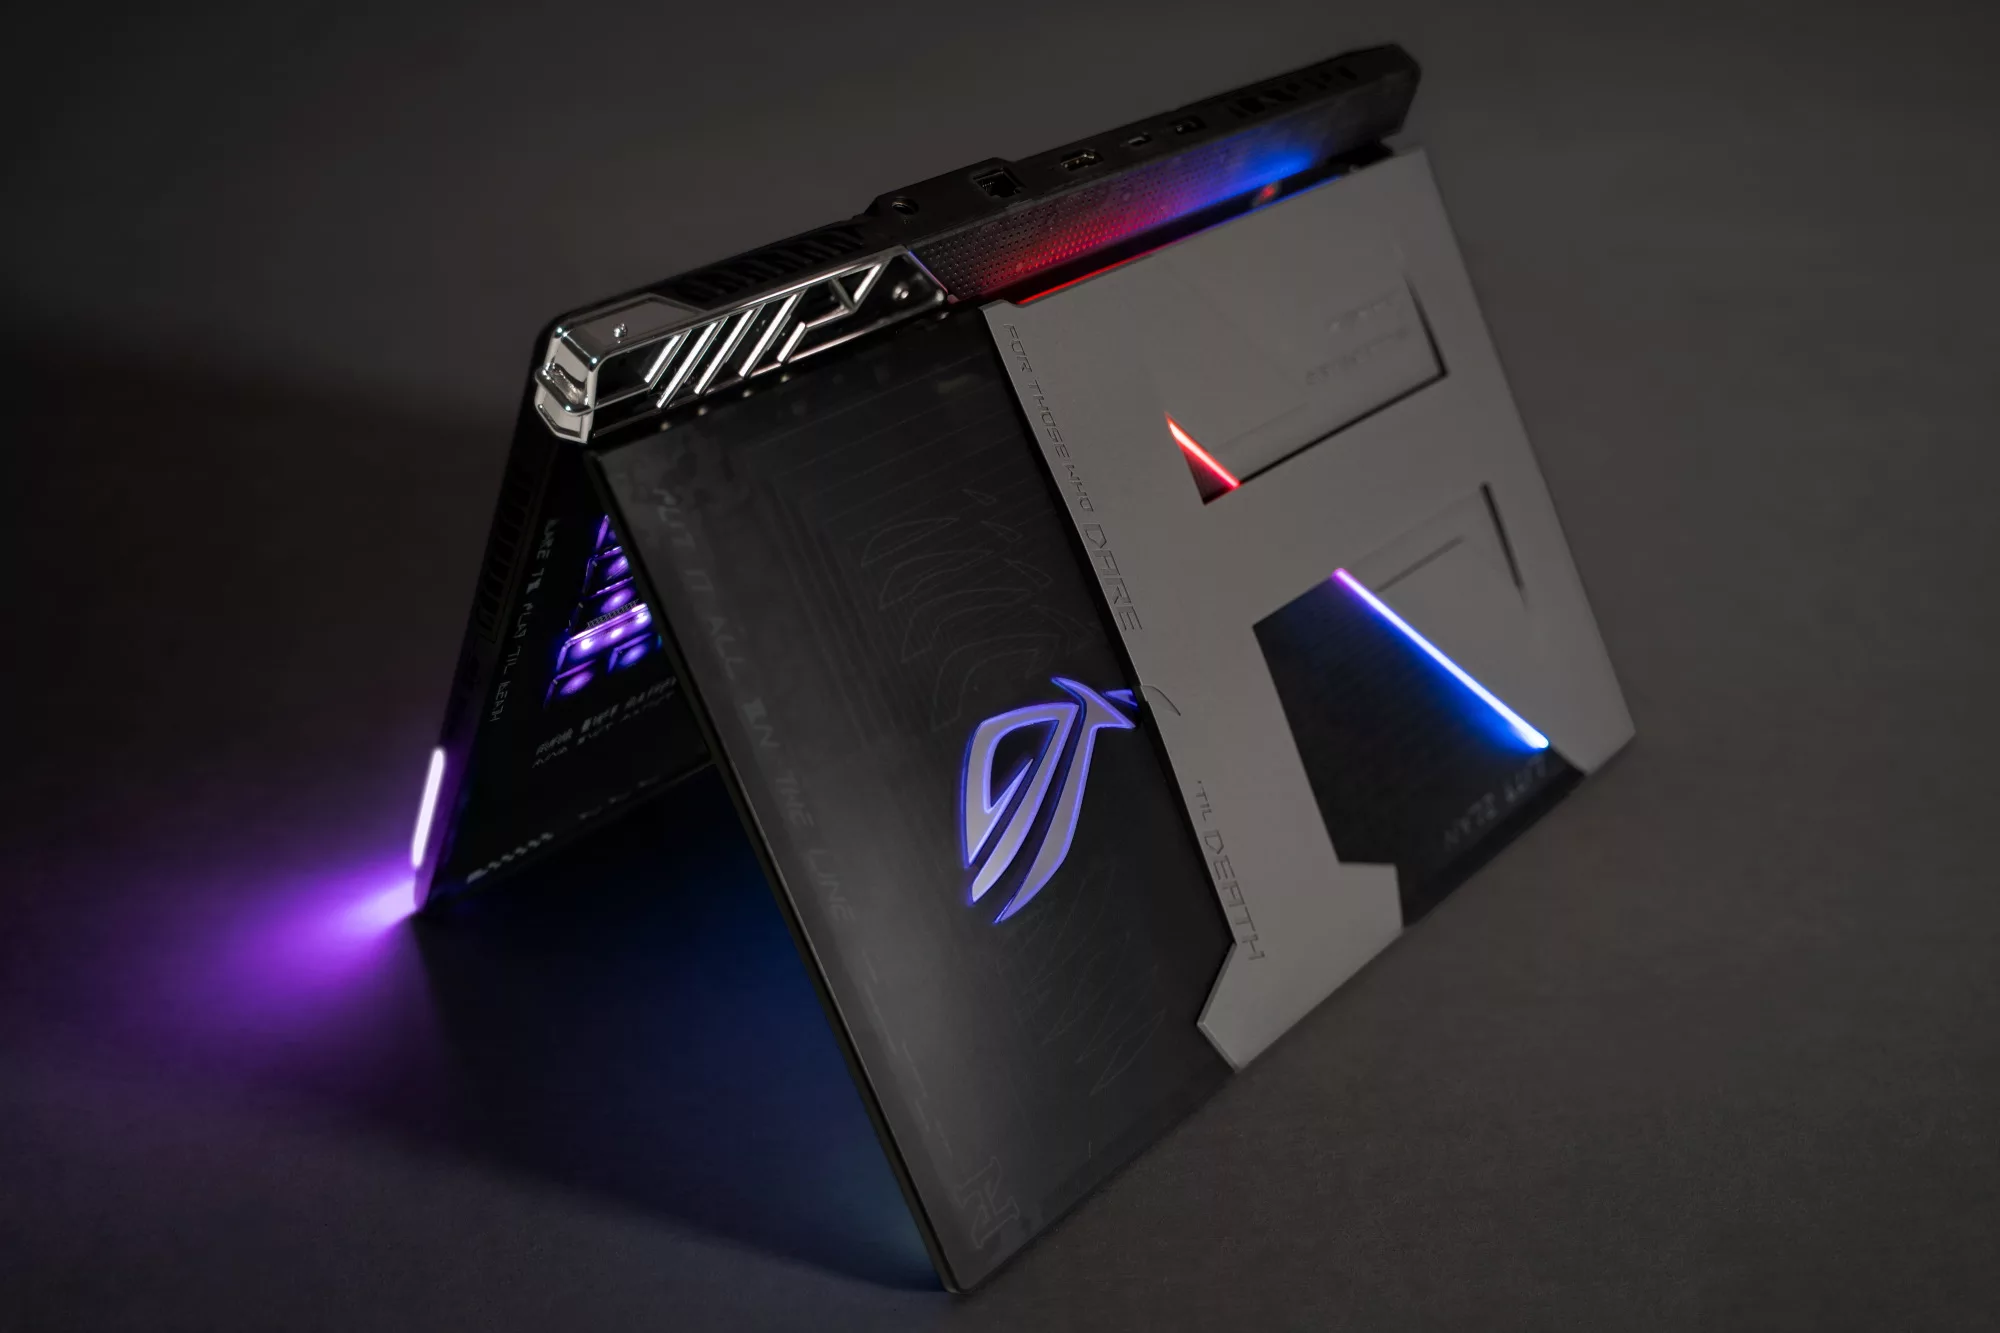 The custom laptop is stood up like a tent, with purple RGB illuminated and the lid visible.